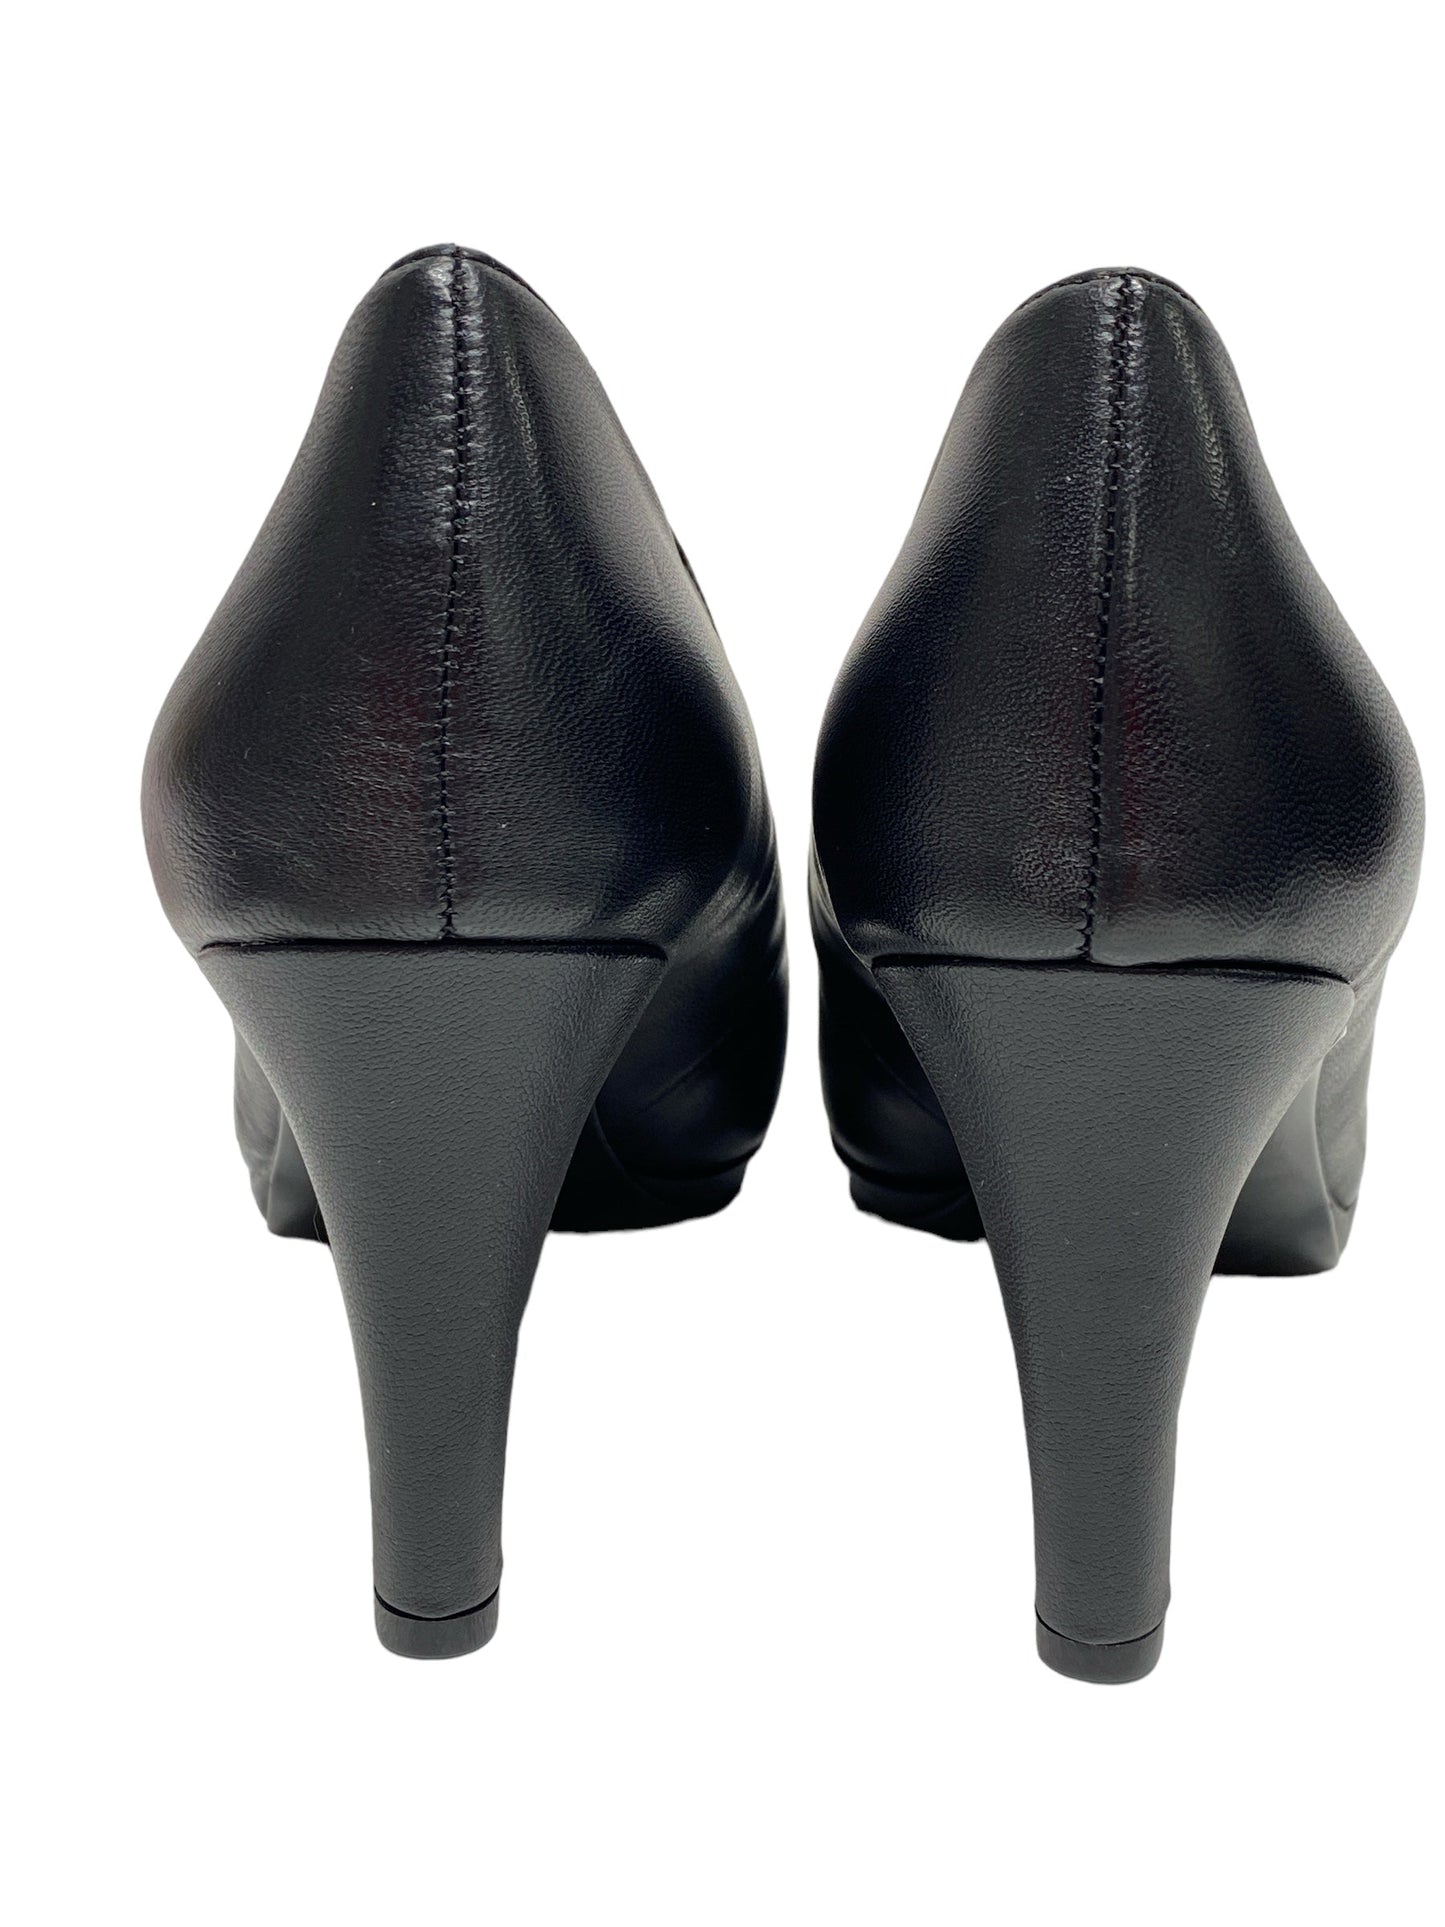 Shoes Heels Stiletto By Naturalizer  Size: 9.5